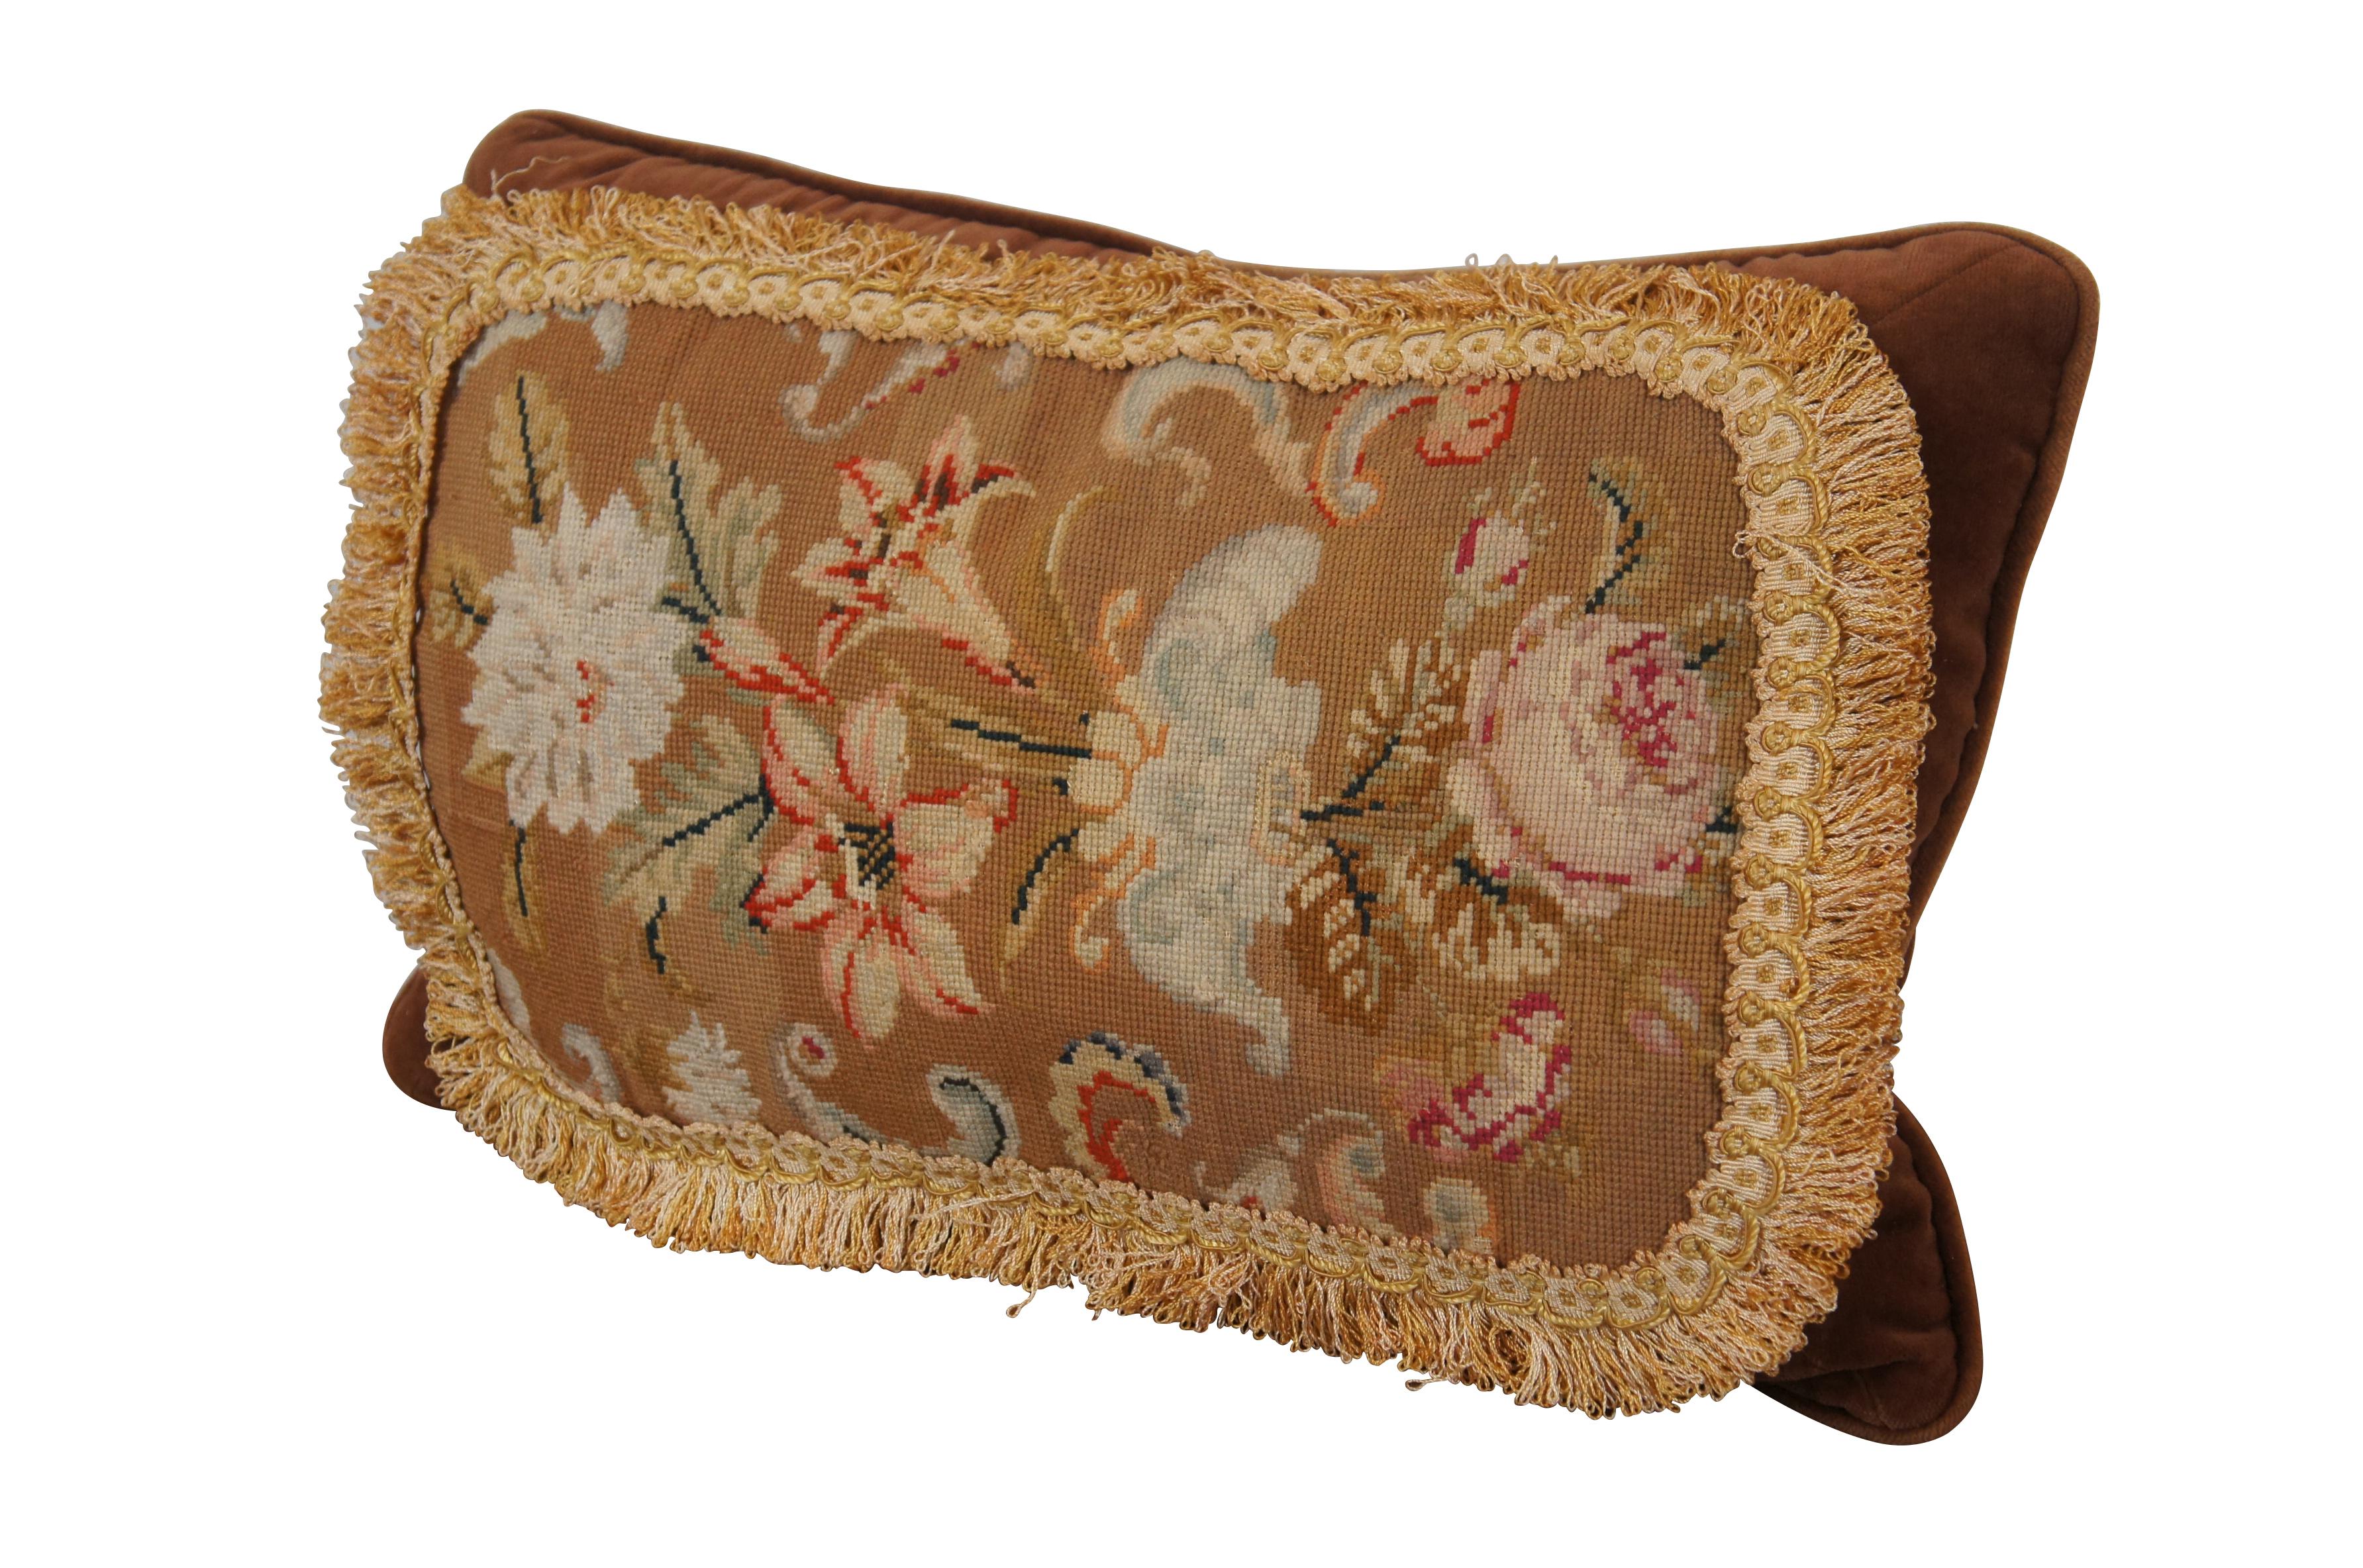 20th century down filled brown velour / velvet lumbar throw pillow, hand embroidered with an array of flowers, roses and lilies on a camel brown background, framed in cream and gold fringe. Brown velvet / velour back with piping along seams. Sewn